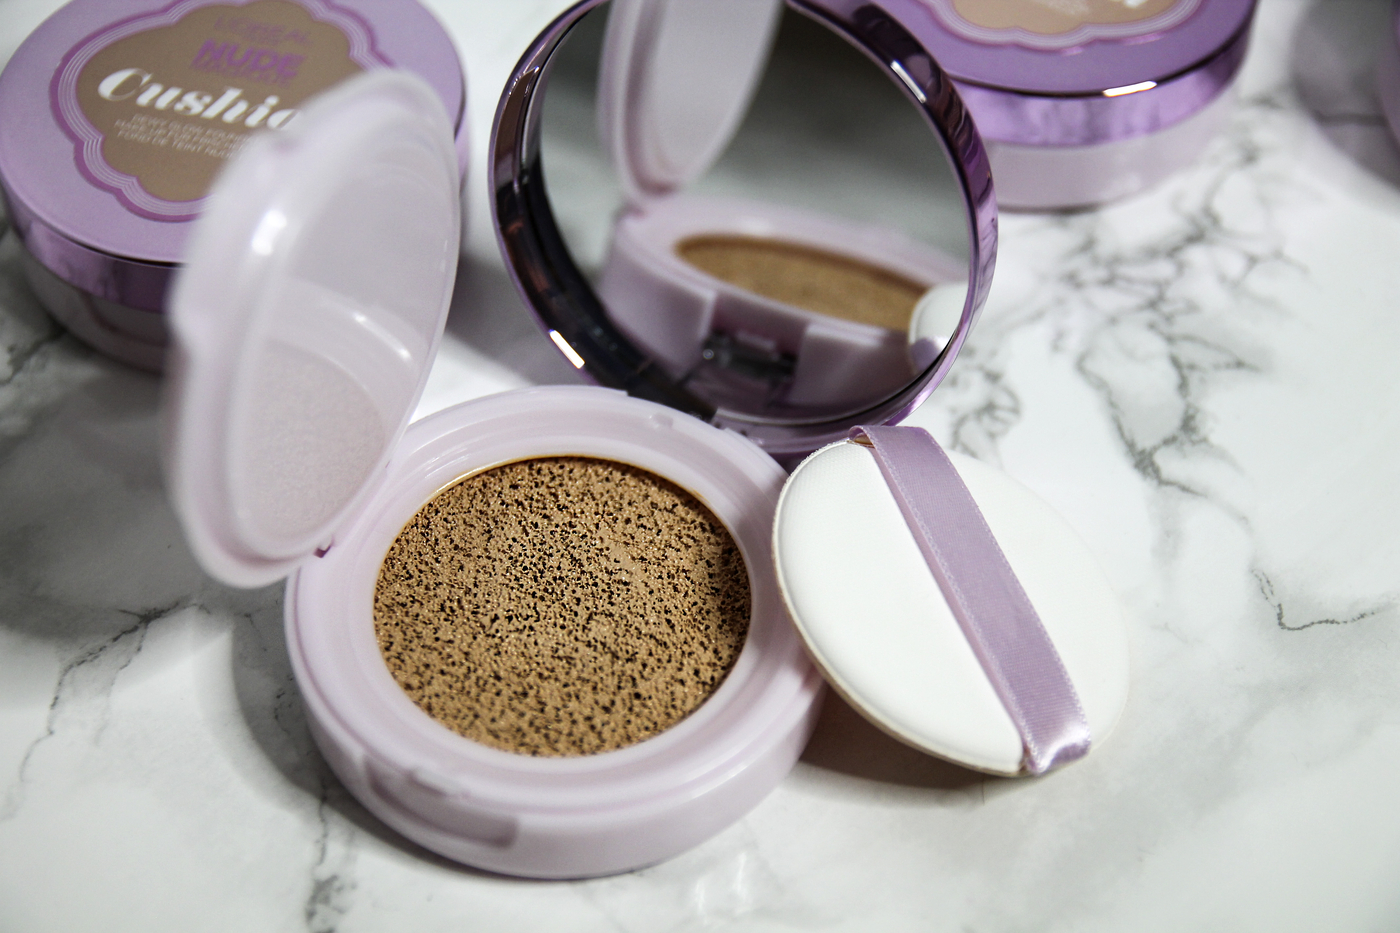 Loreal Paris Nude Magique Cushion Foundation Oh So Many Reasons Lily